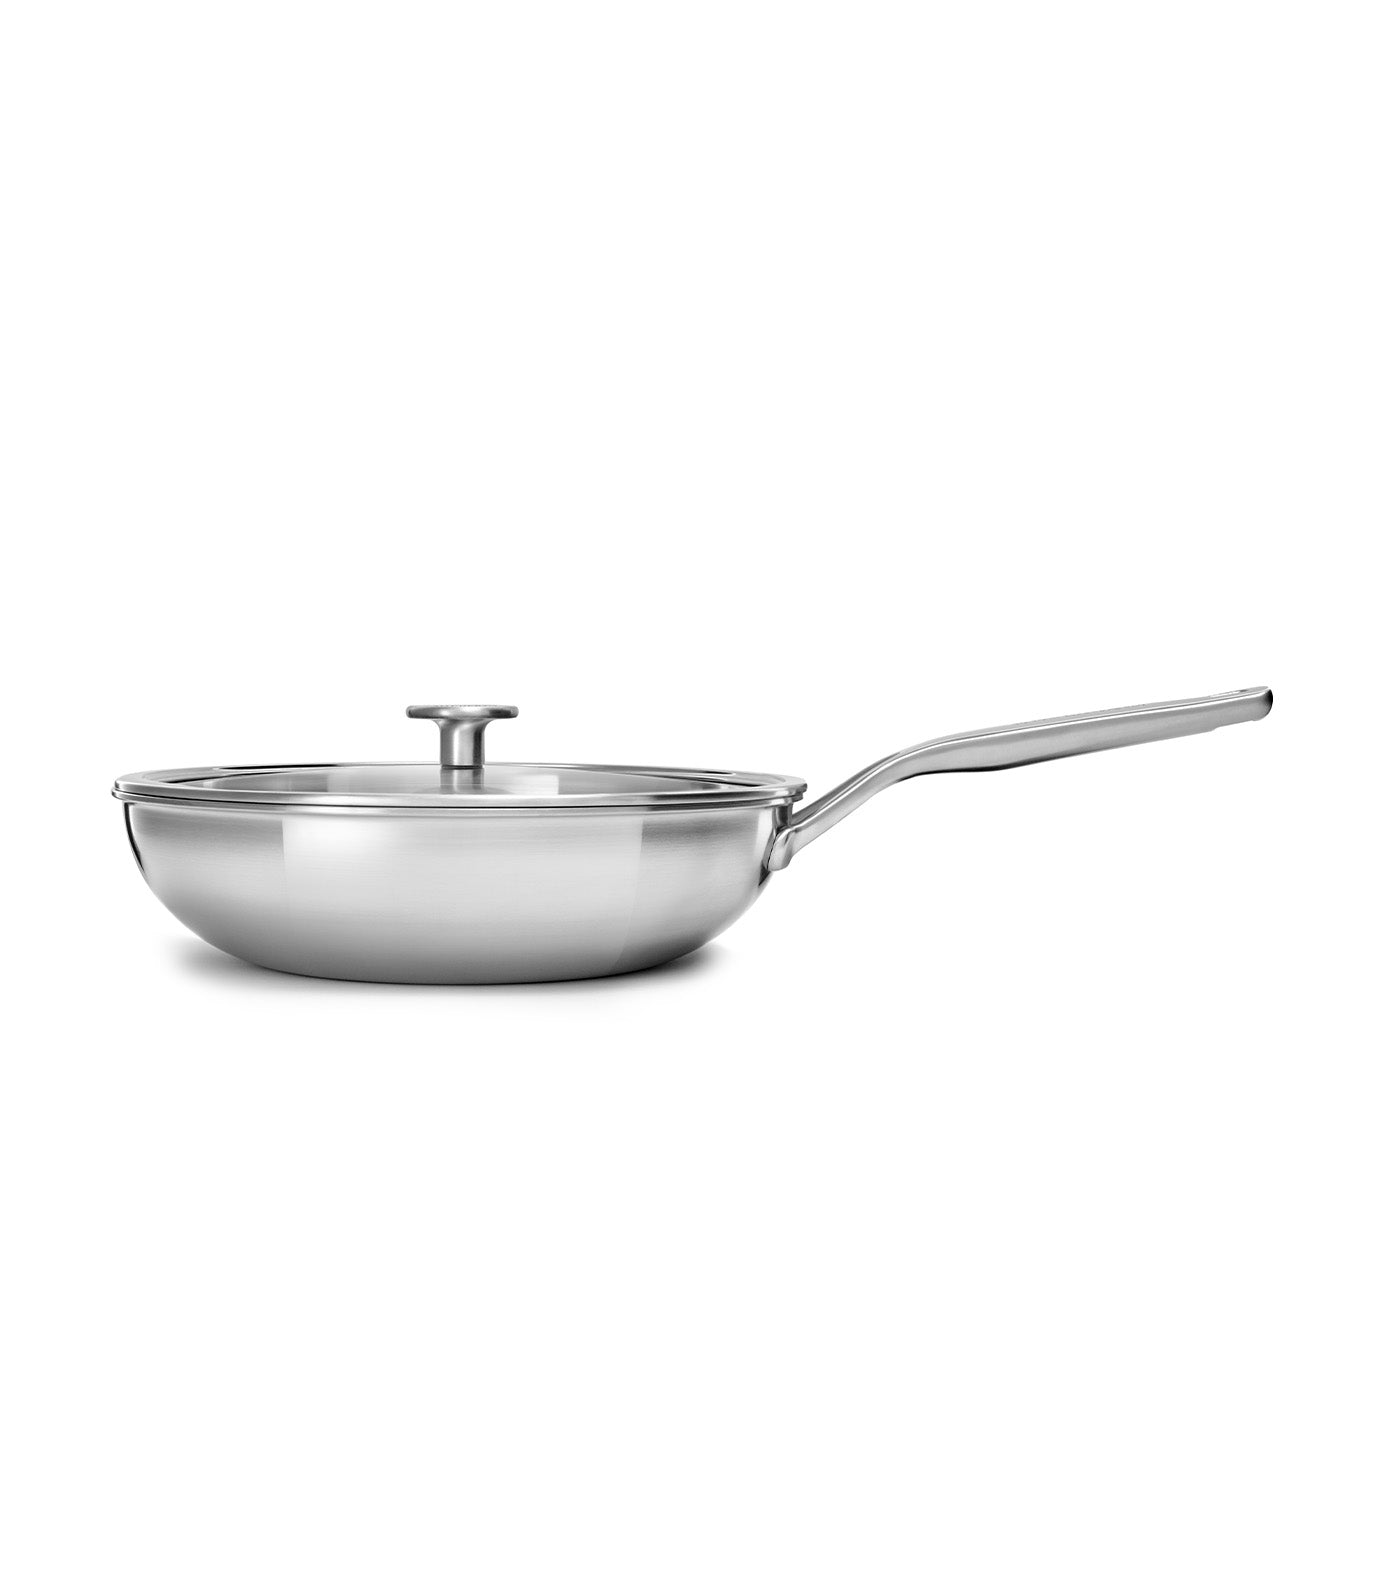 KitchenAid Multiply Tri-Ply Covered Wok Pan Uncoated - 28cm